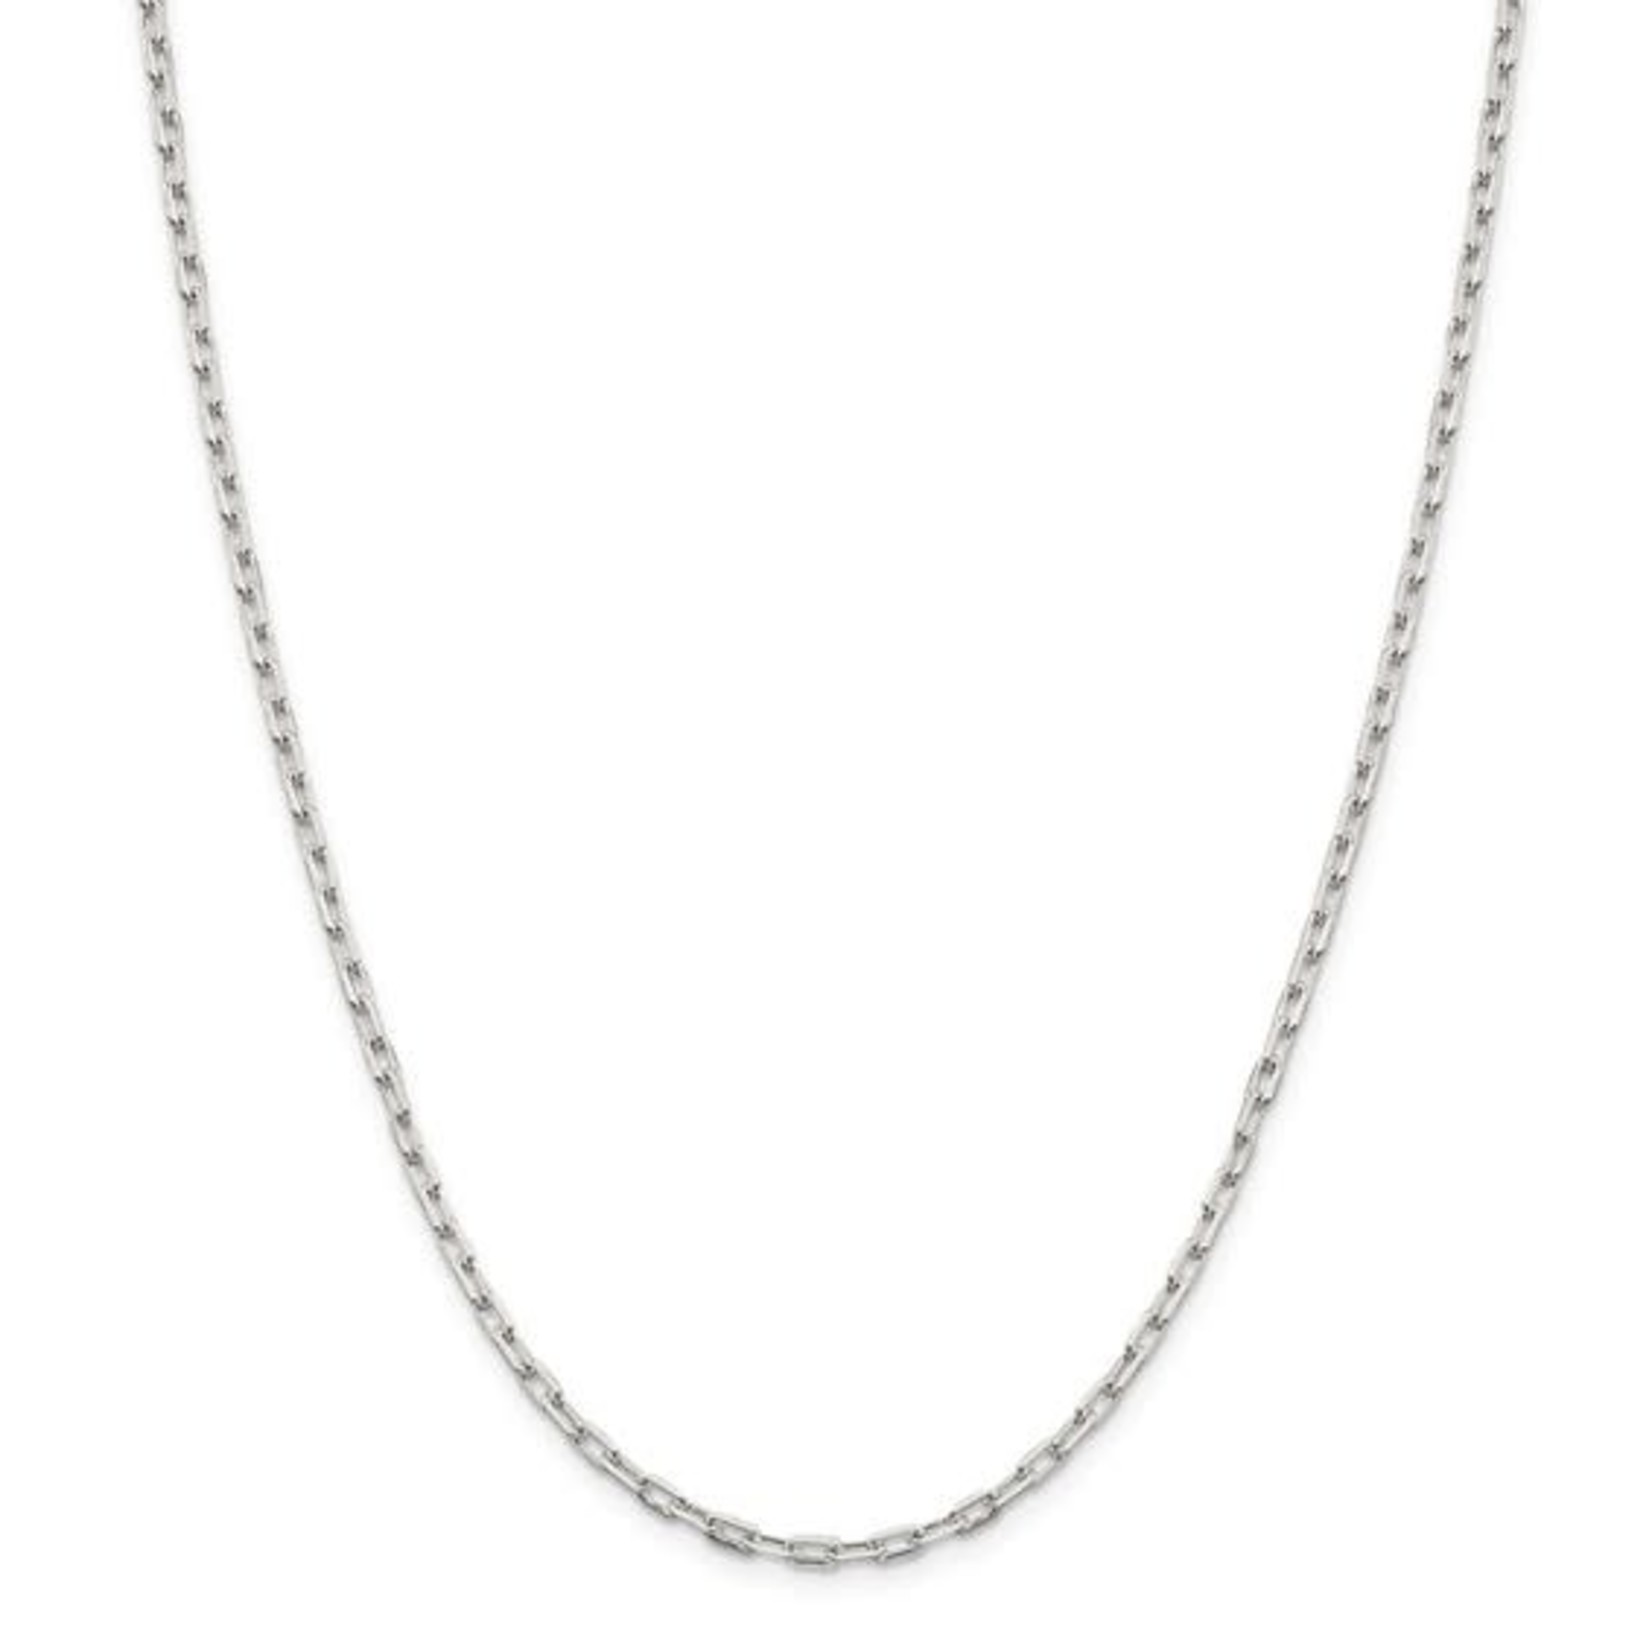 This Is Life Mini Paper Link Sterling Silver 18"  Chain